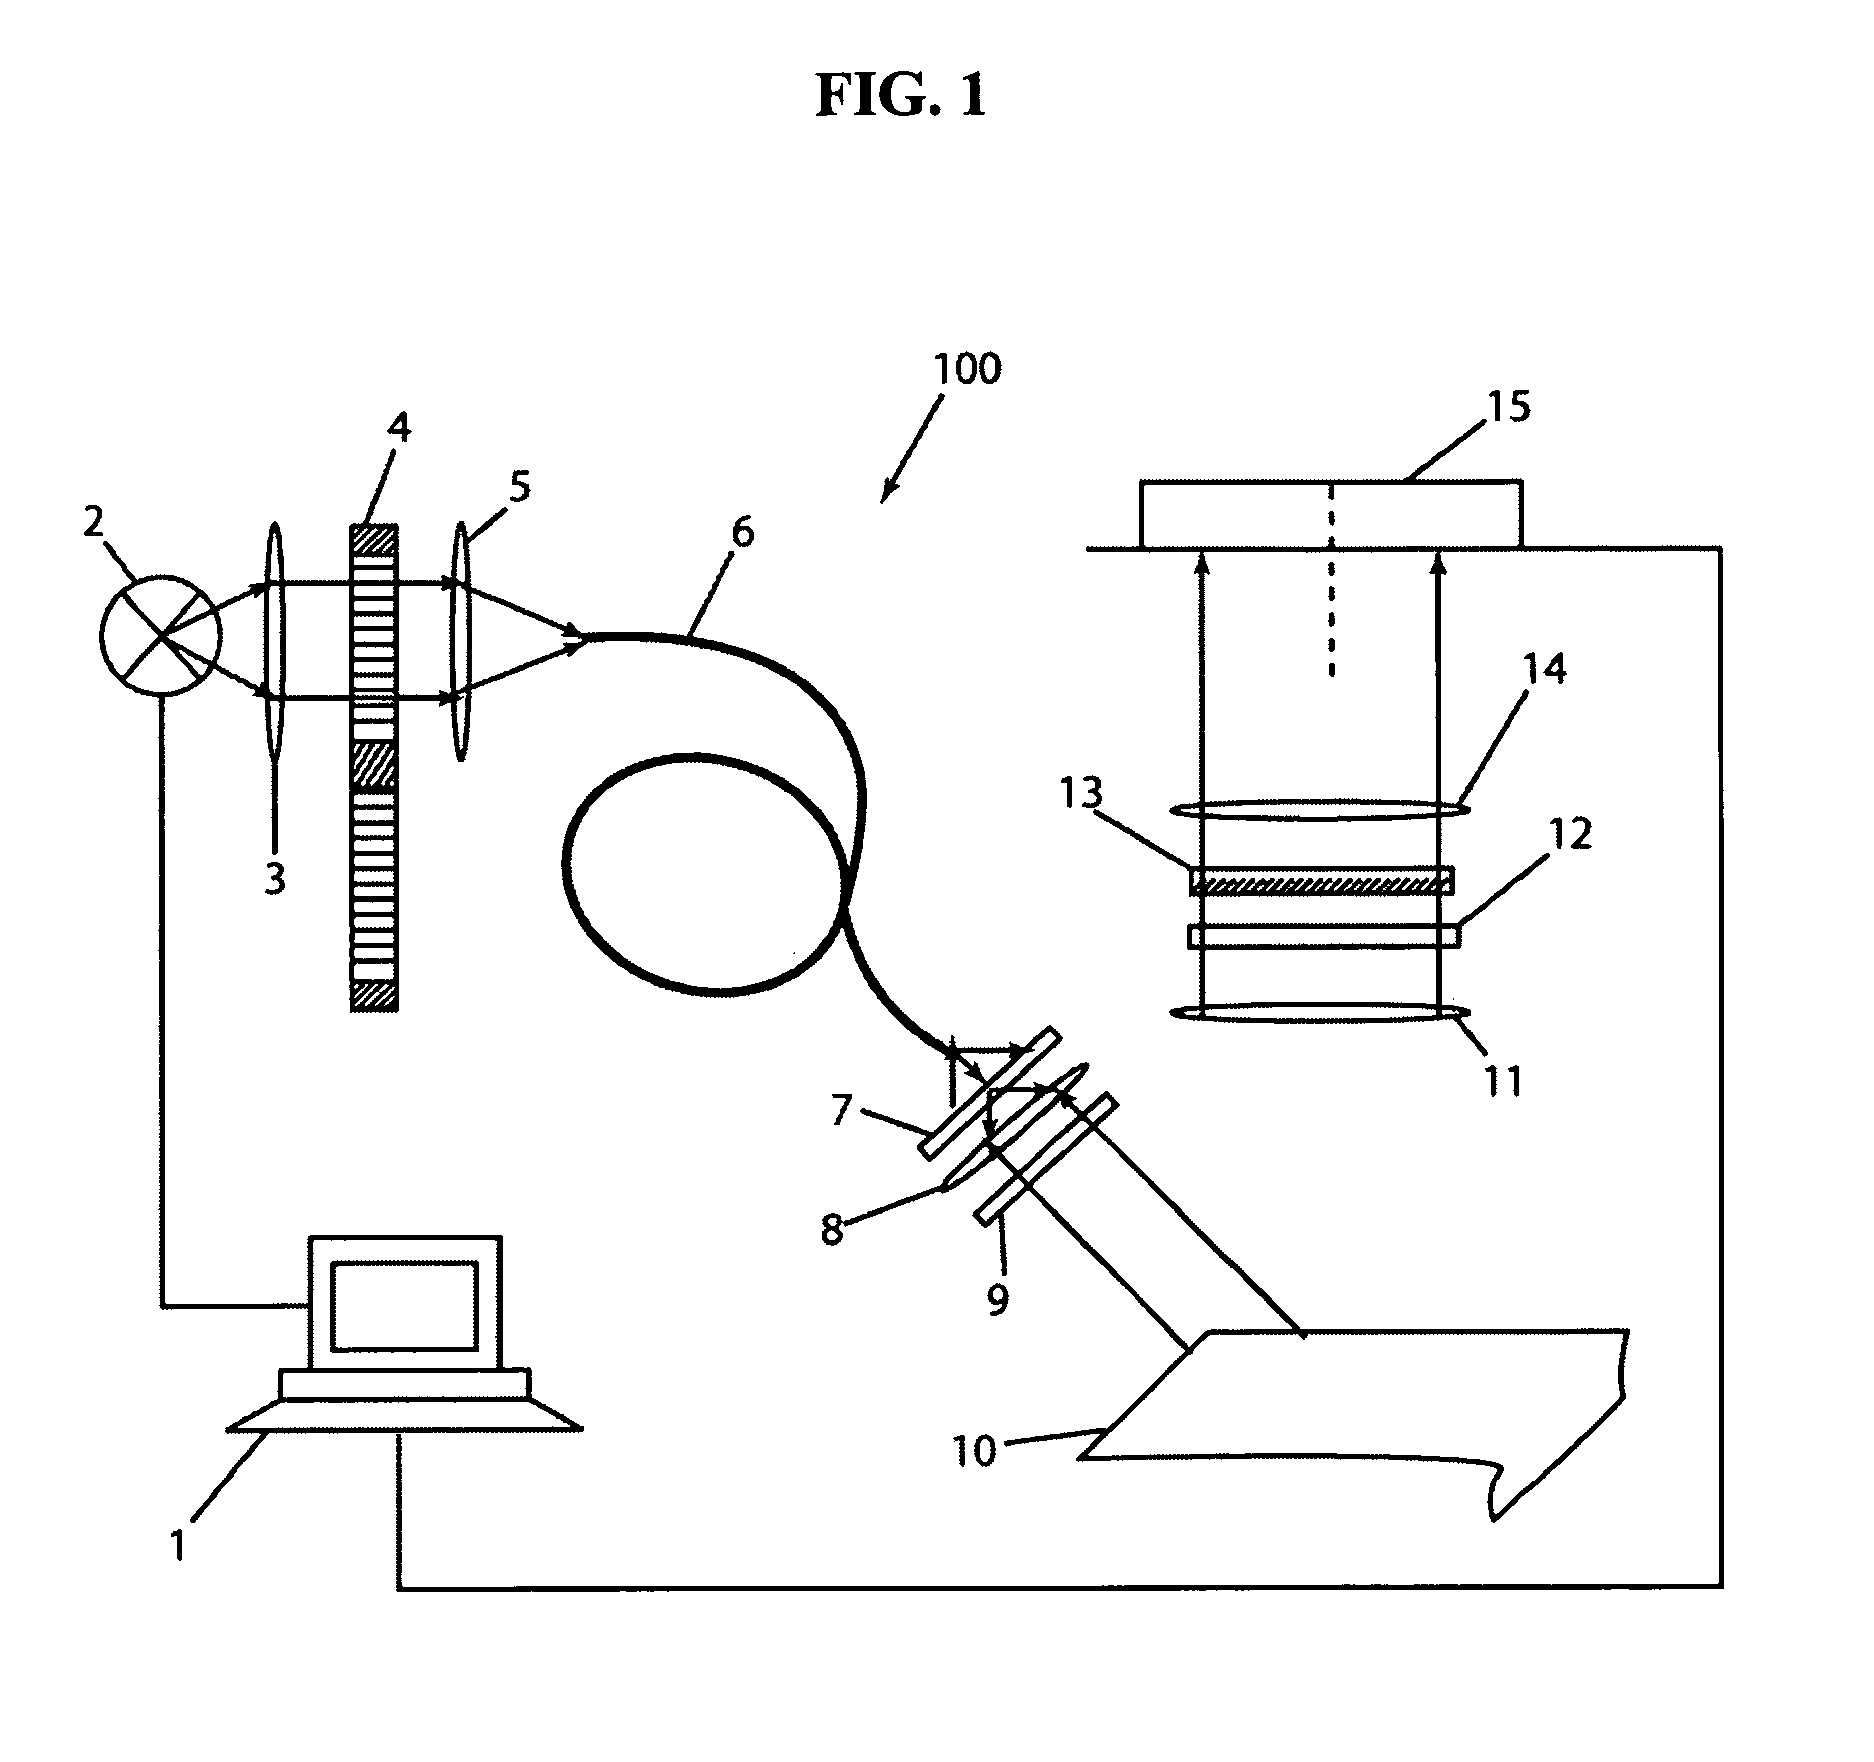 Fluorescence polarization imaging devices and methods